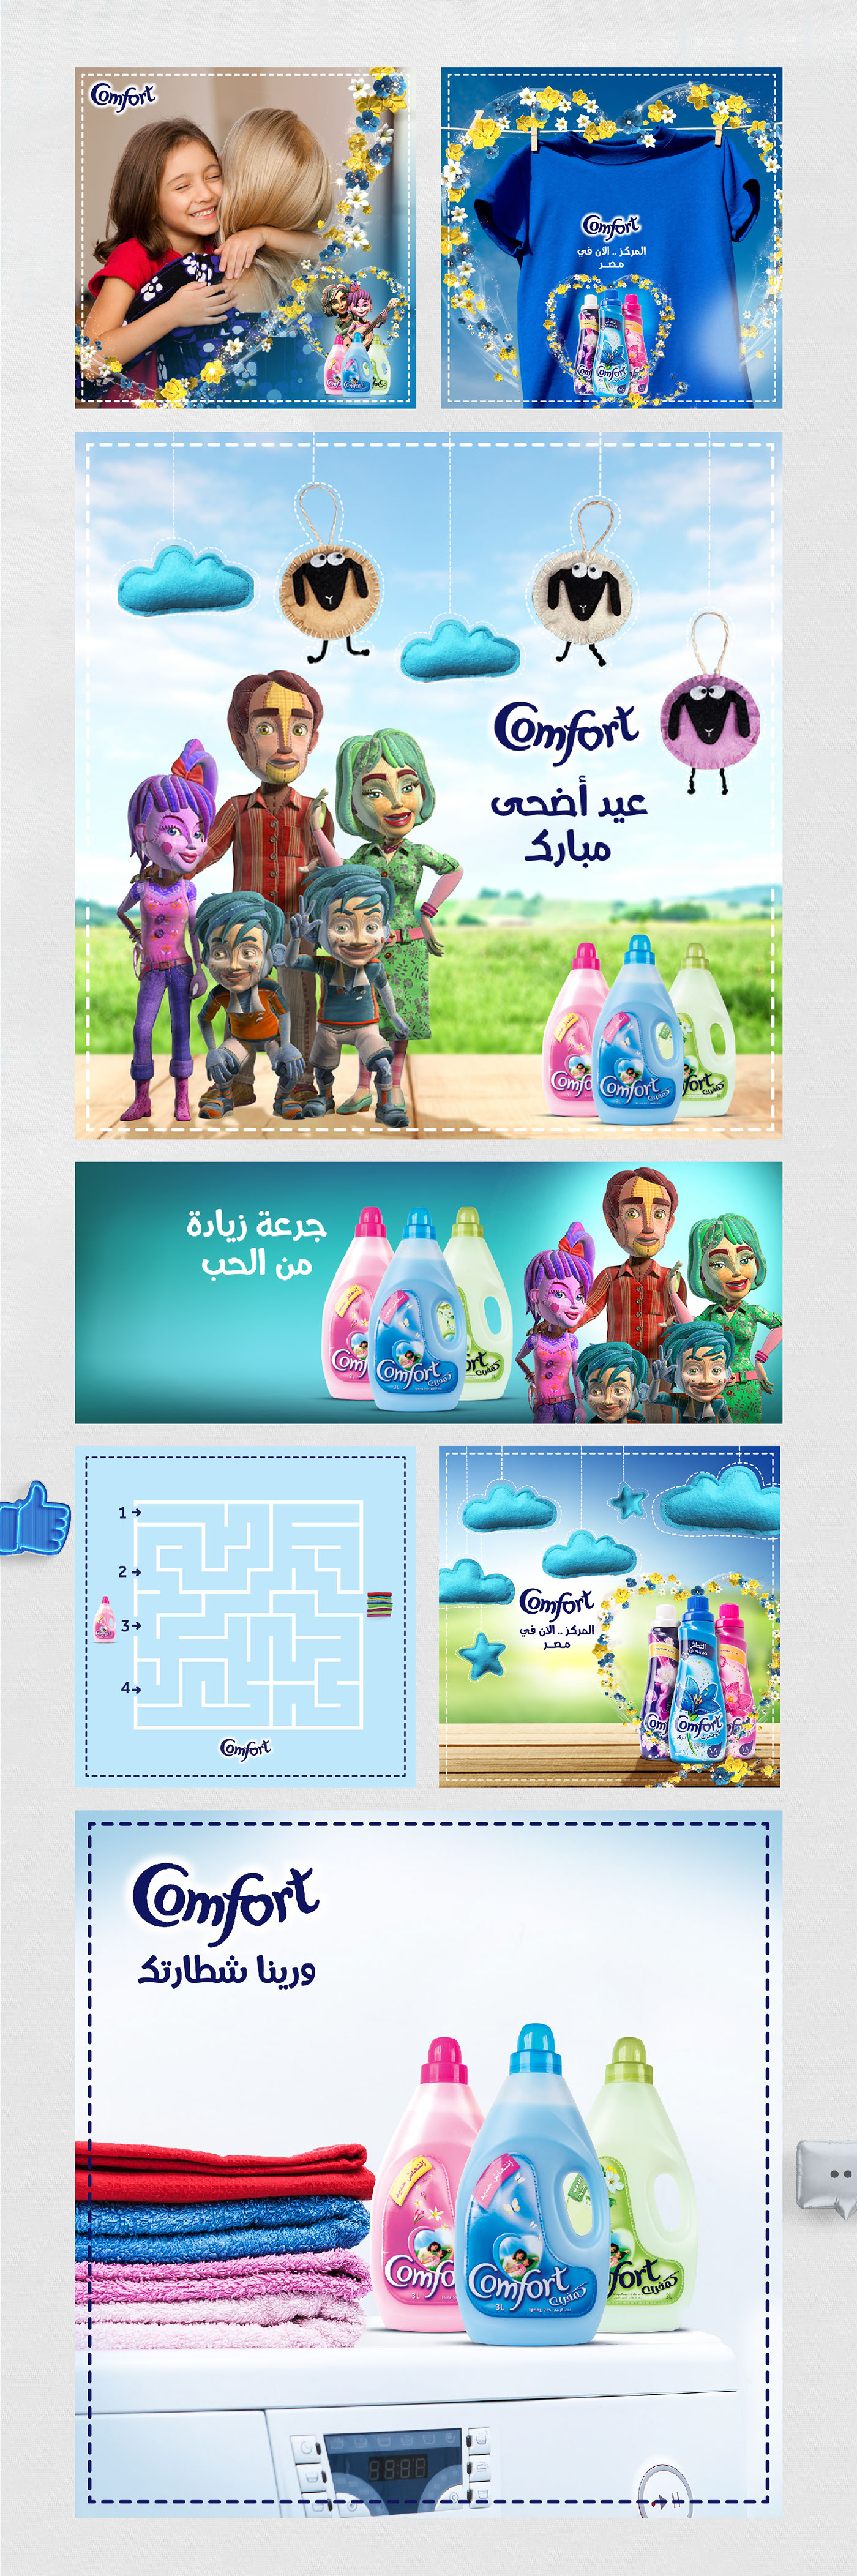 Social media posts for comfort unilever summer campaign at the Middle East.